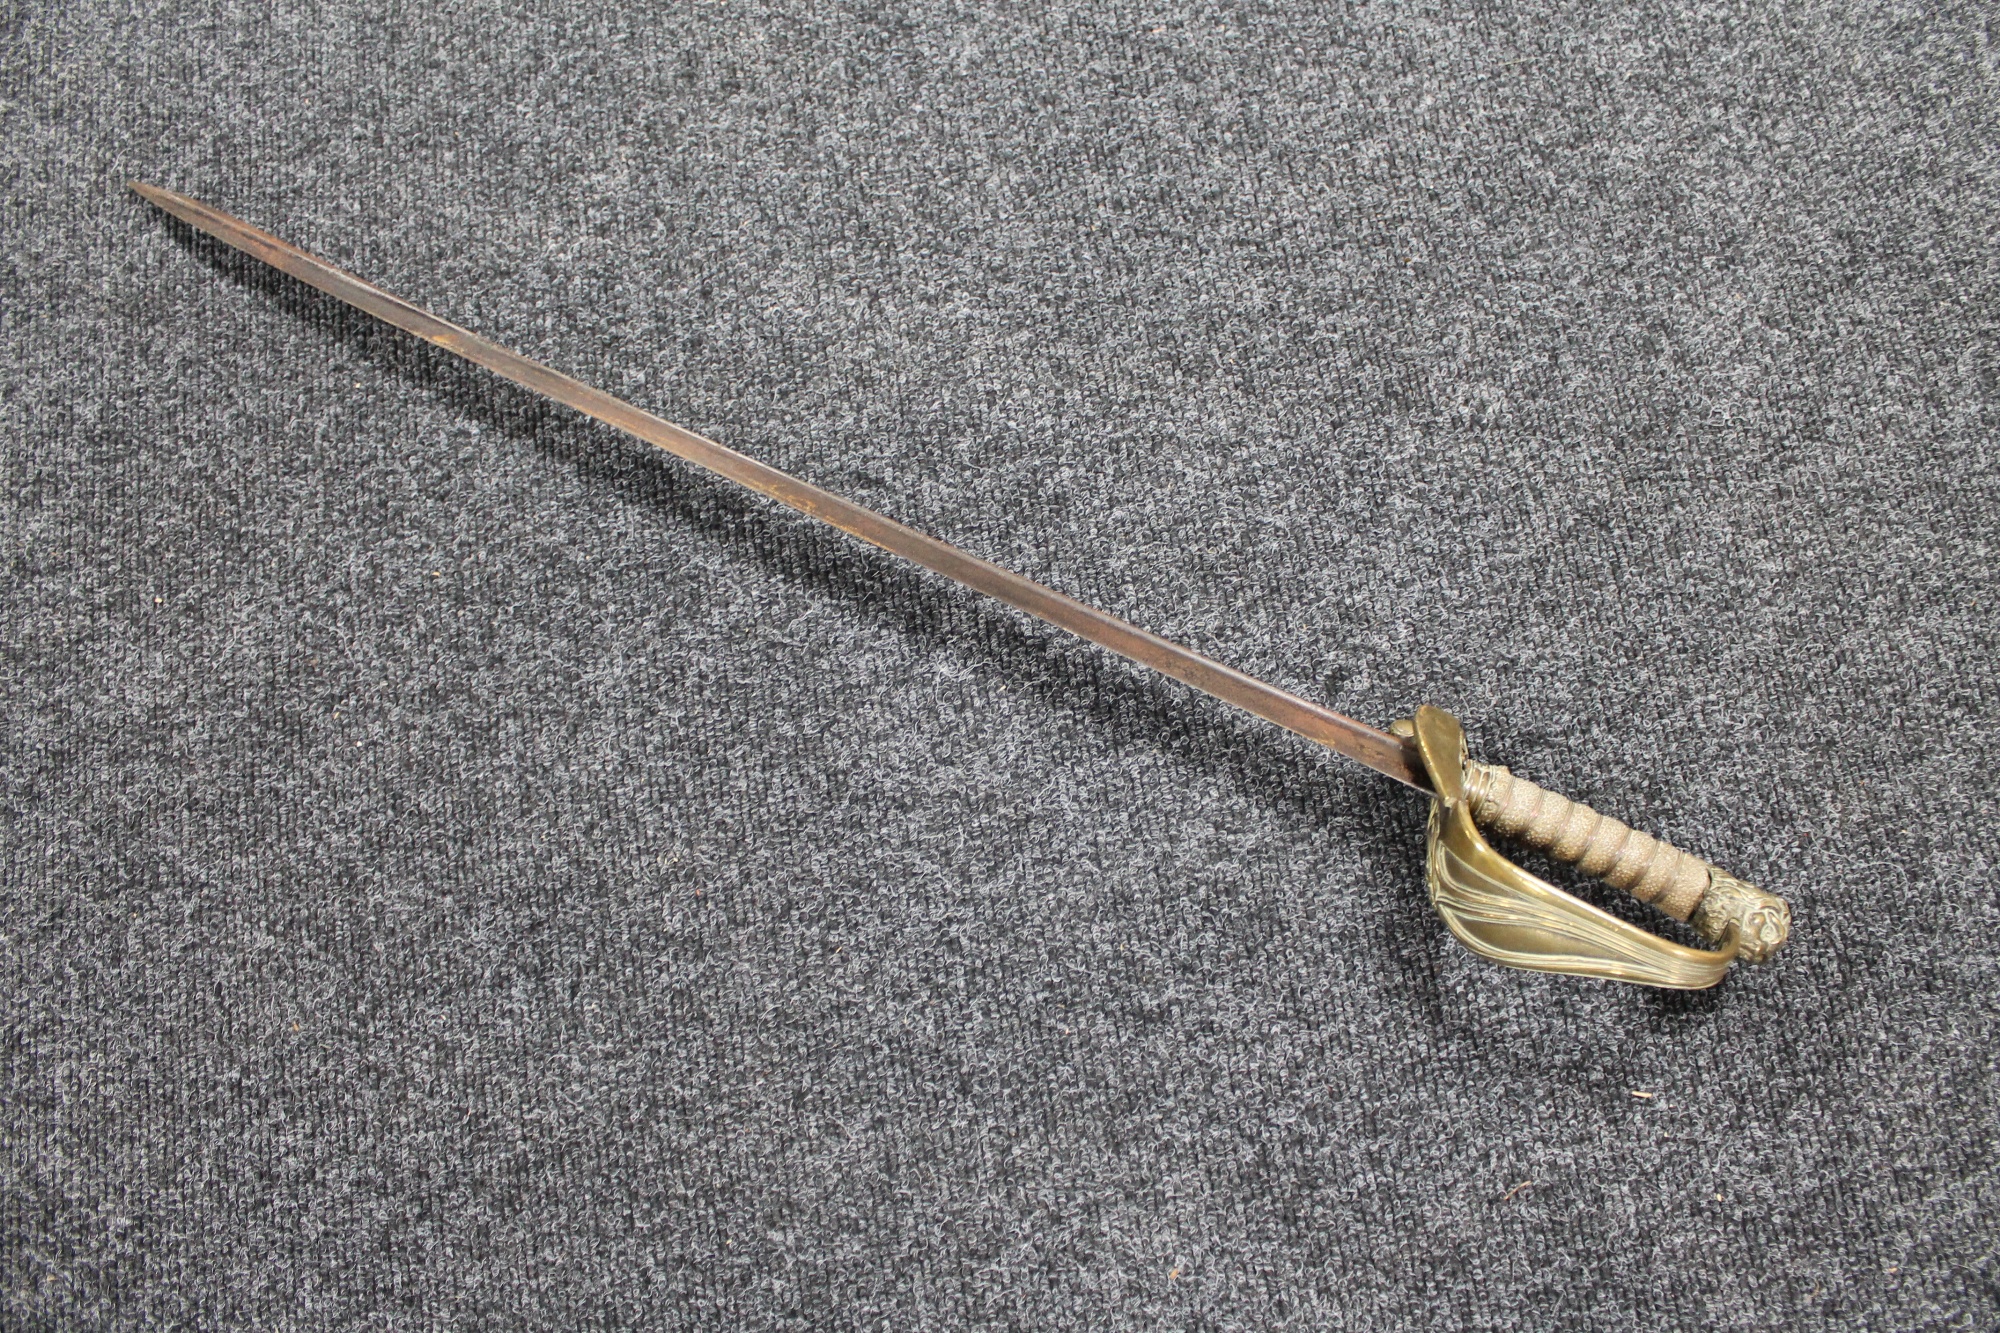 A 19th century brass handled sword with lion head pommel